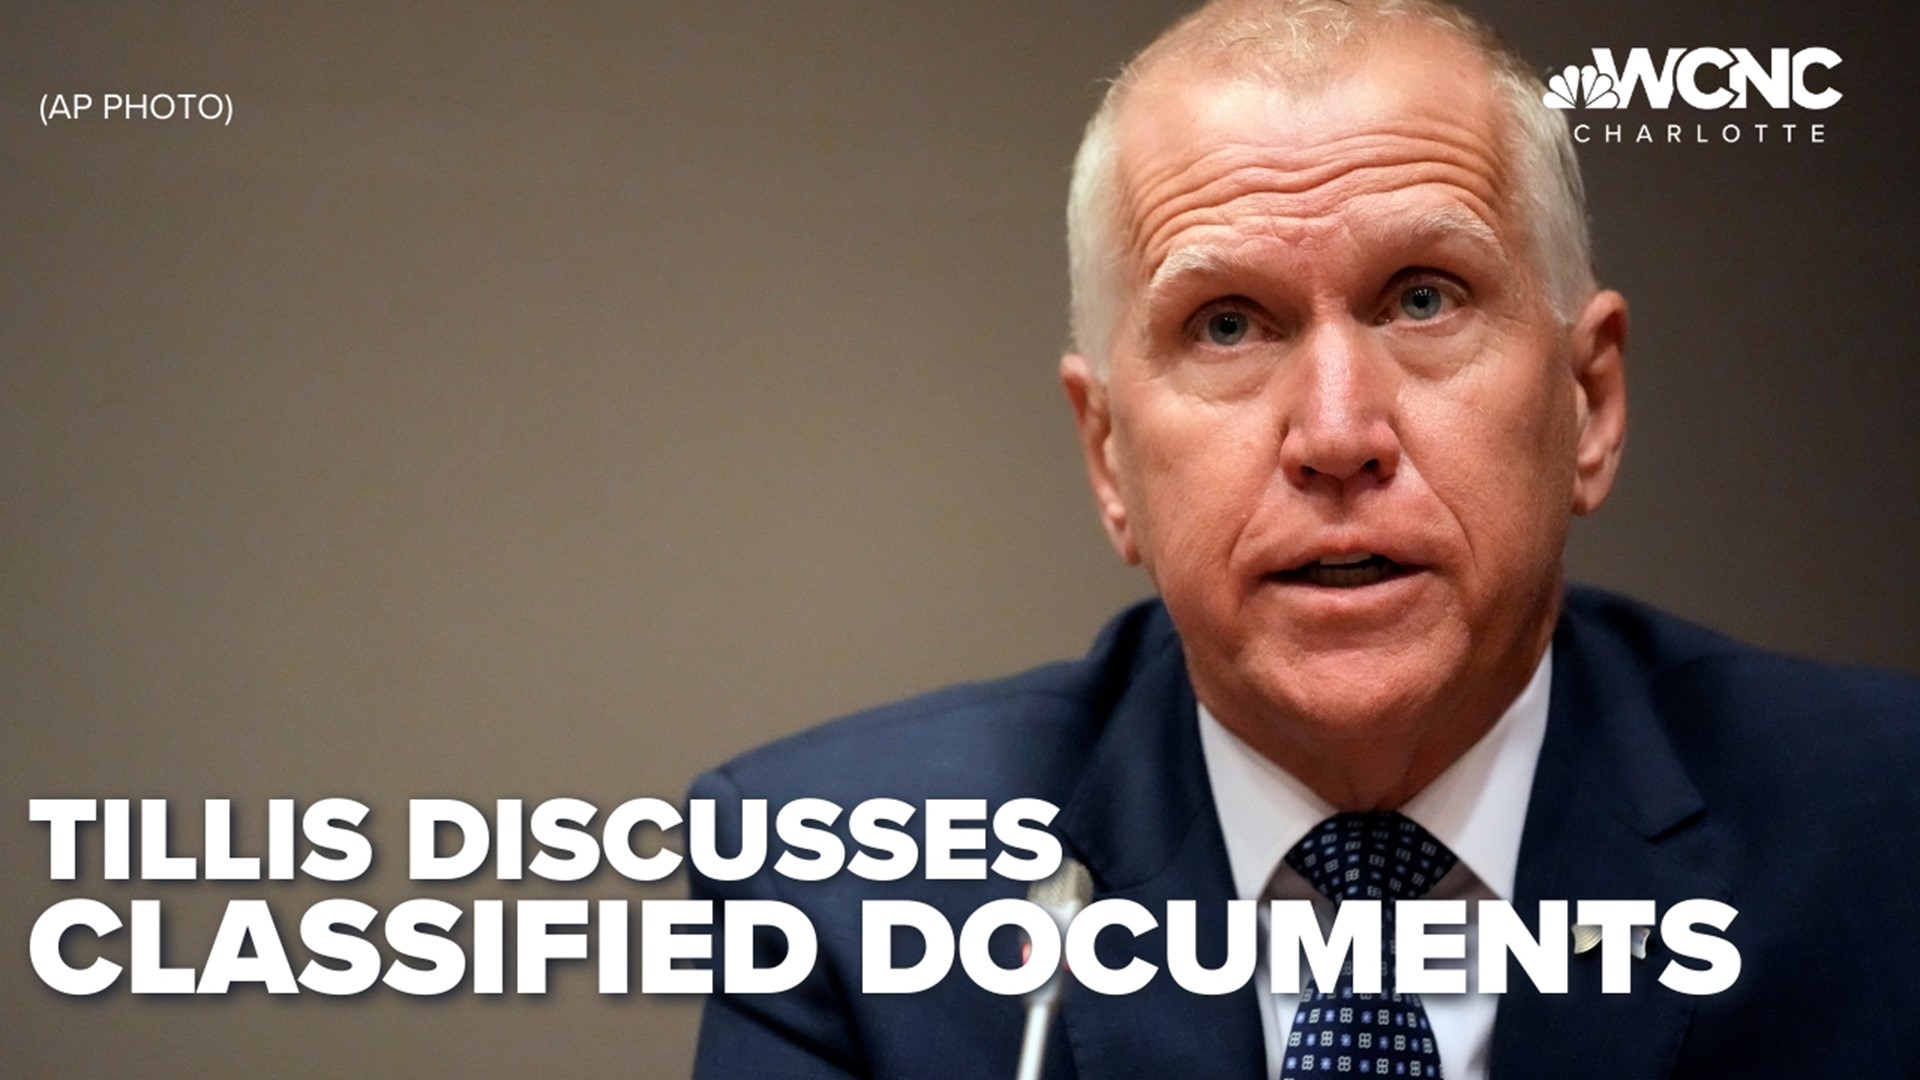 Sen. Tillis calls for independent investigations into recent classified document discoveries